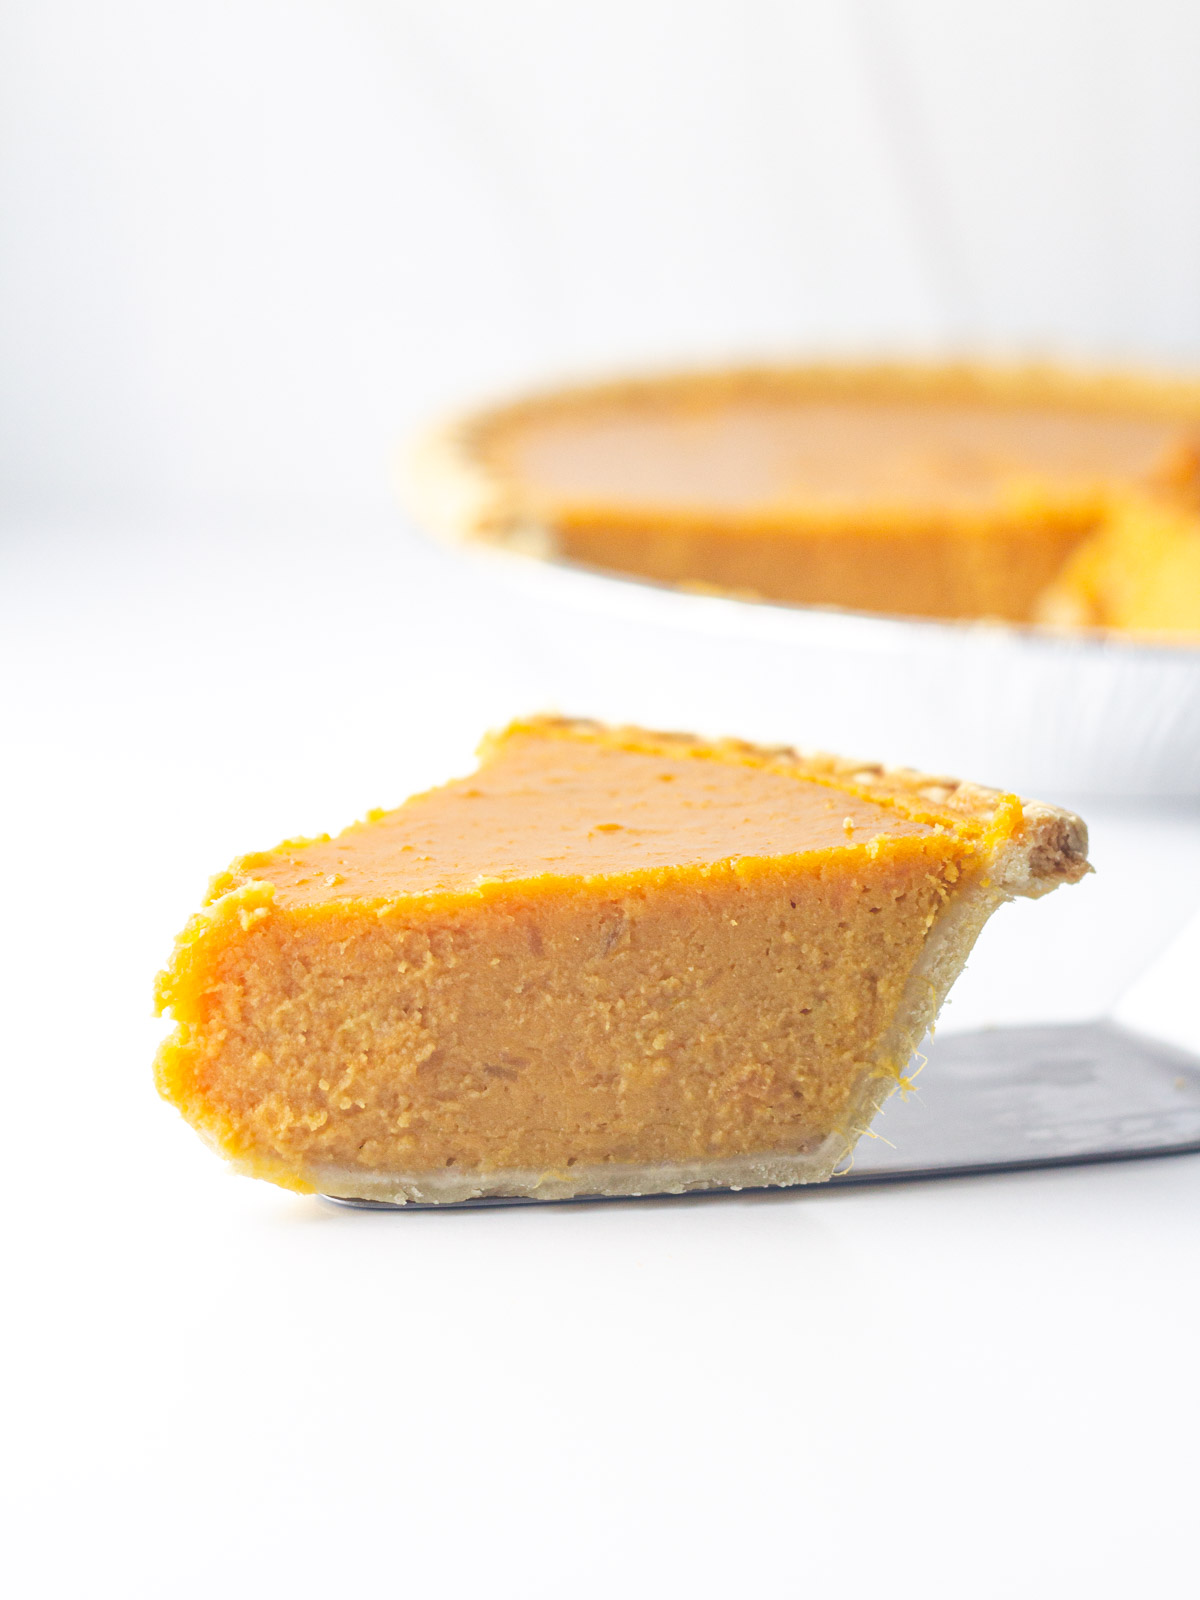 A slice of sweet potato pie on the pie slicer on a white surface in front of the rest of the pie blurred in the background going out of frame to the right.